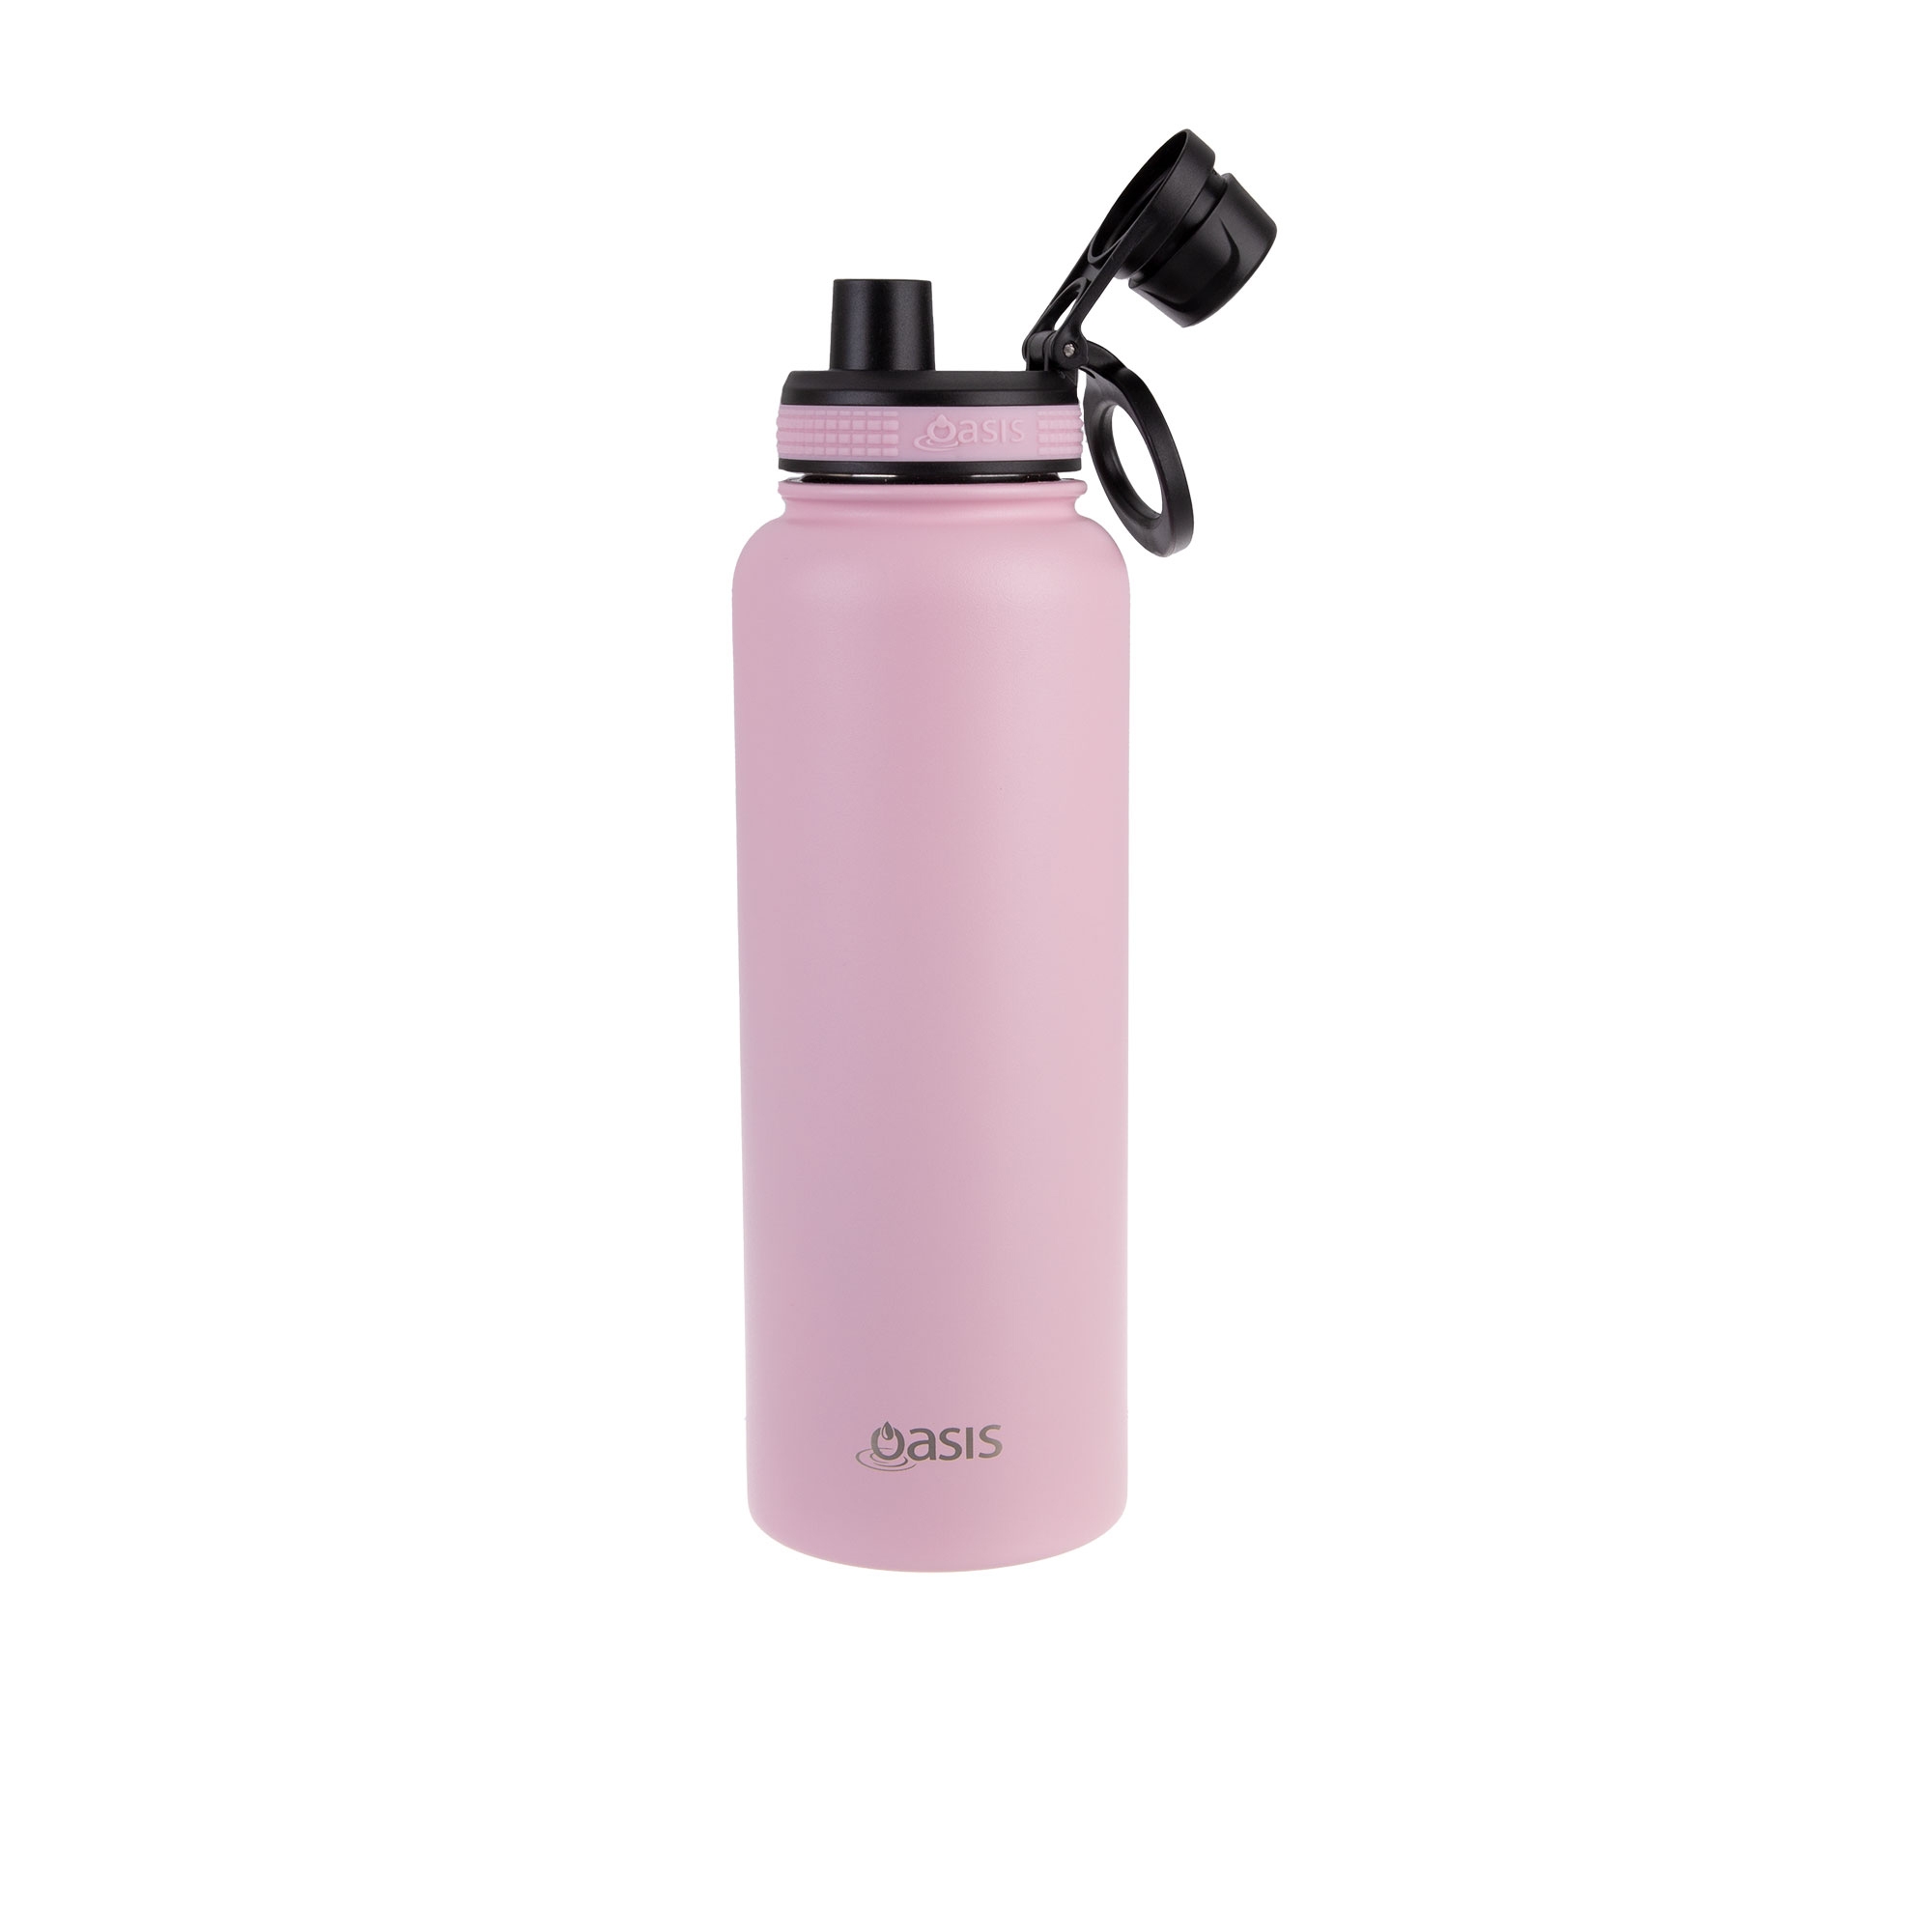 Oasis Challenger Double Wall Insulated Sports Bottle 1.1L Carnation Image 2